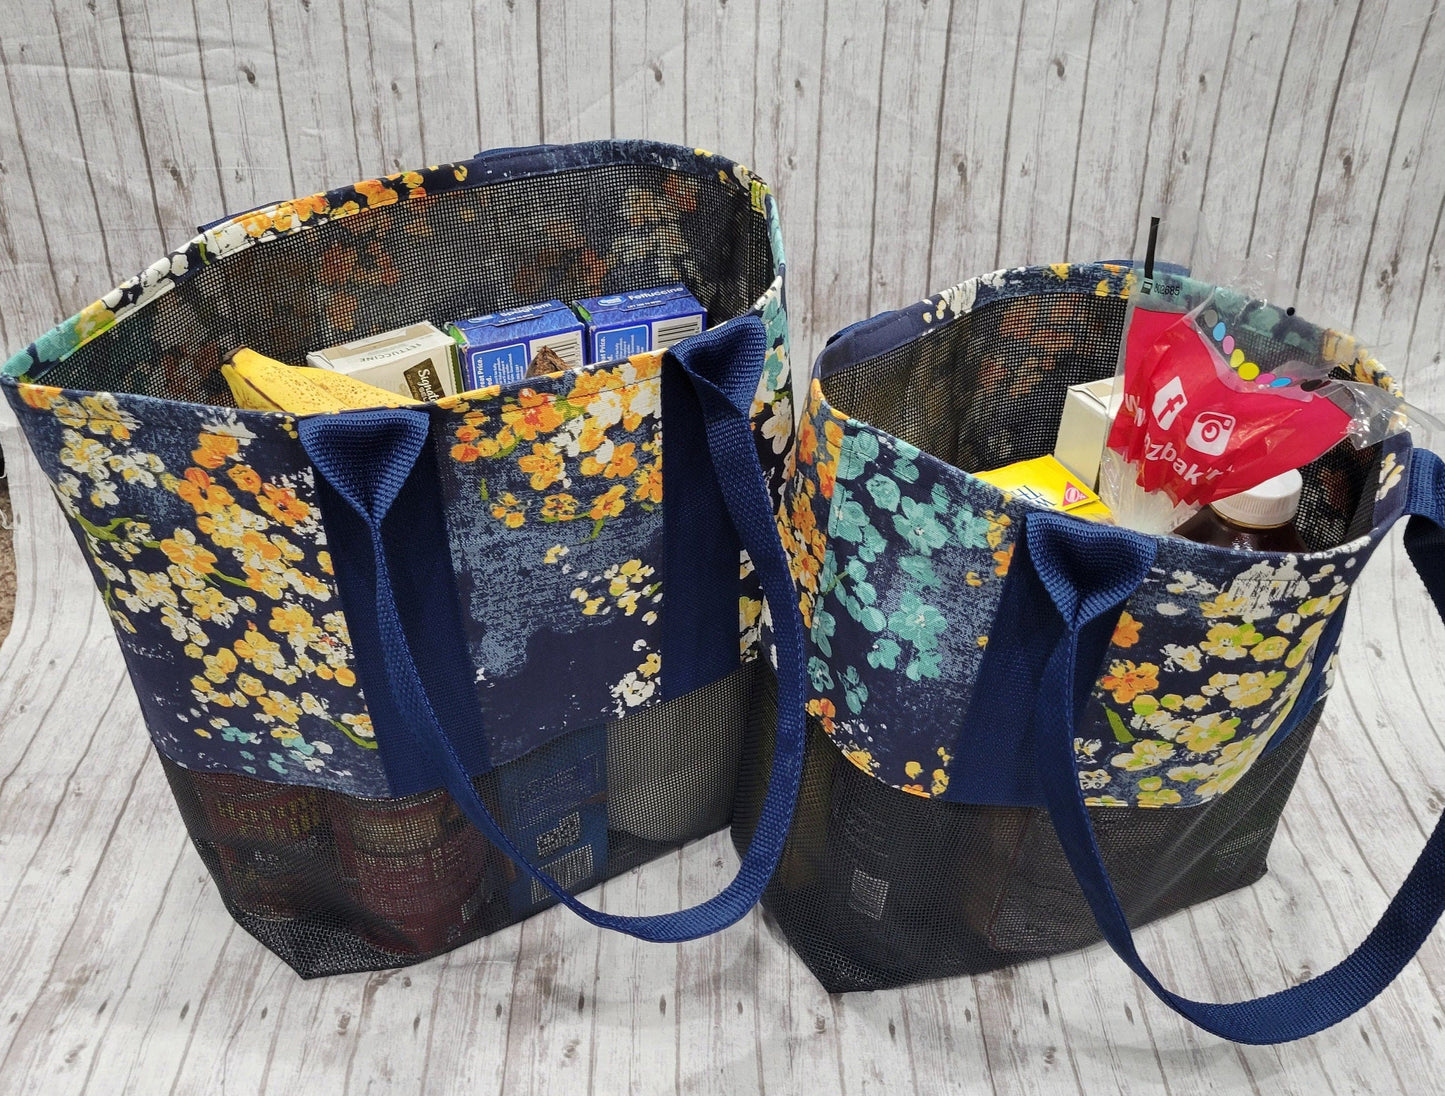 Jo Jo Ultimate Carry-All Tote Set [Camo]: Versatile Practicality for Every Occasion